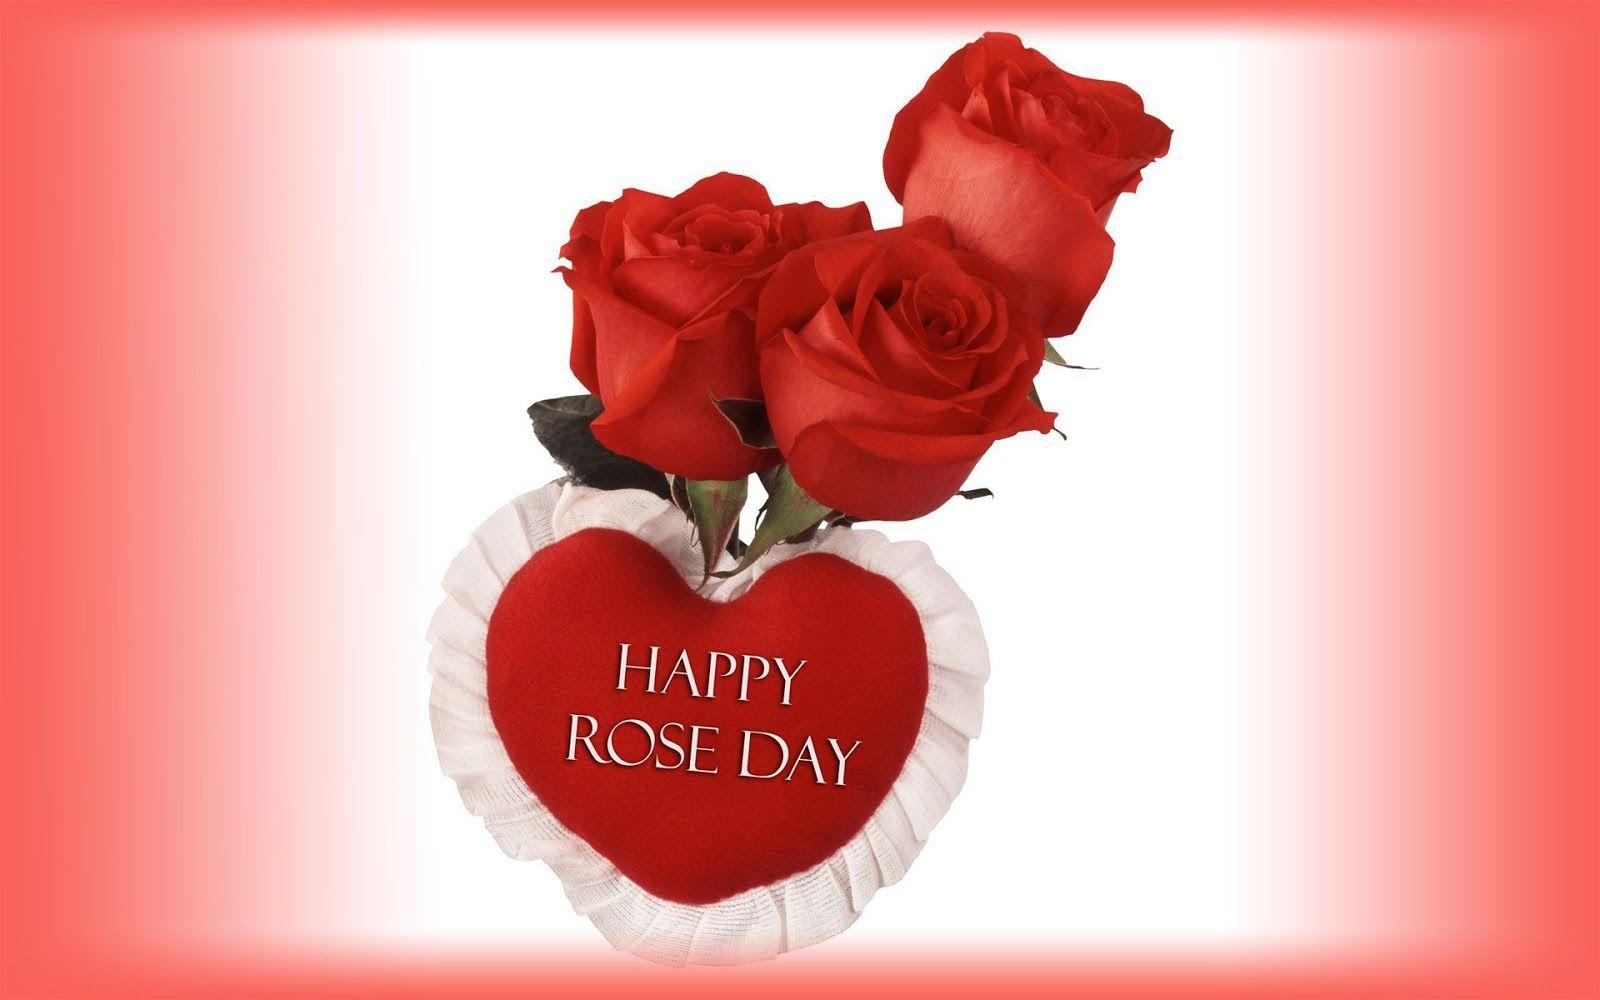 Happy Rose Day Image HD and Wallpapers